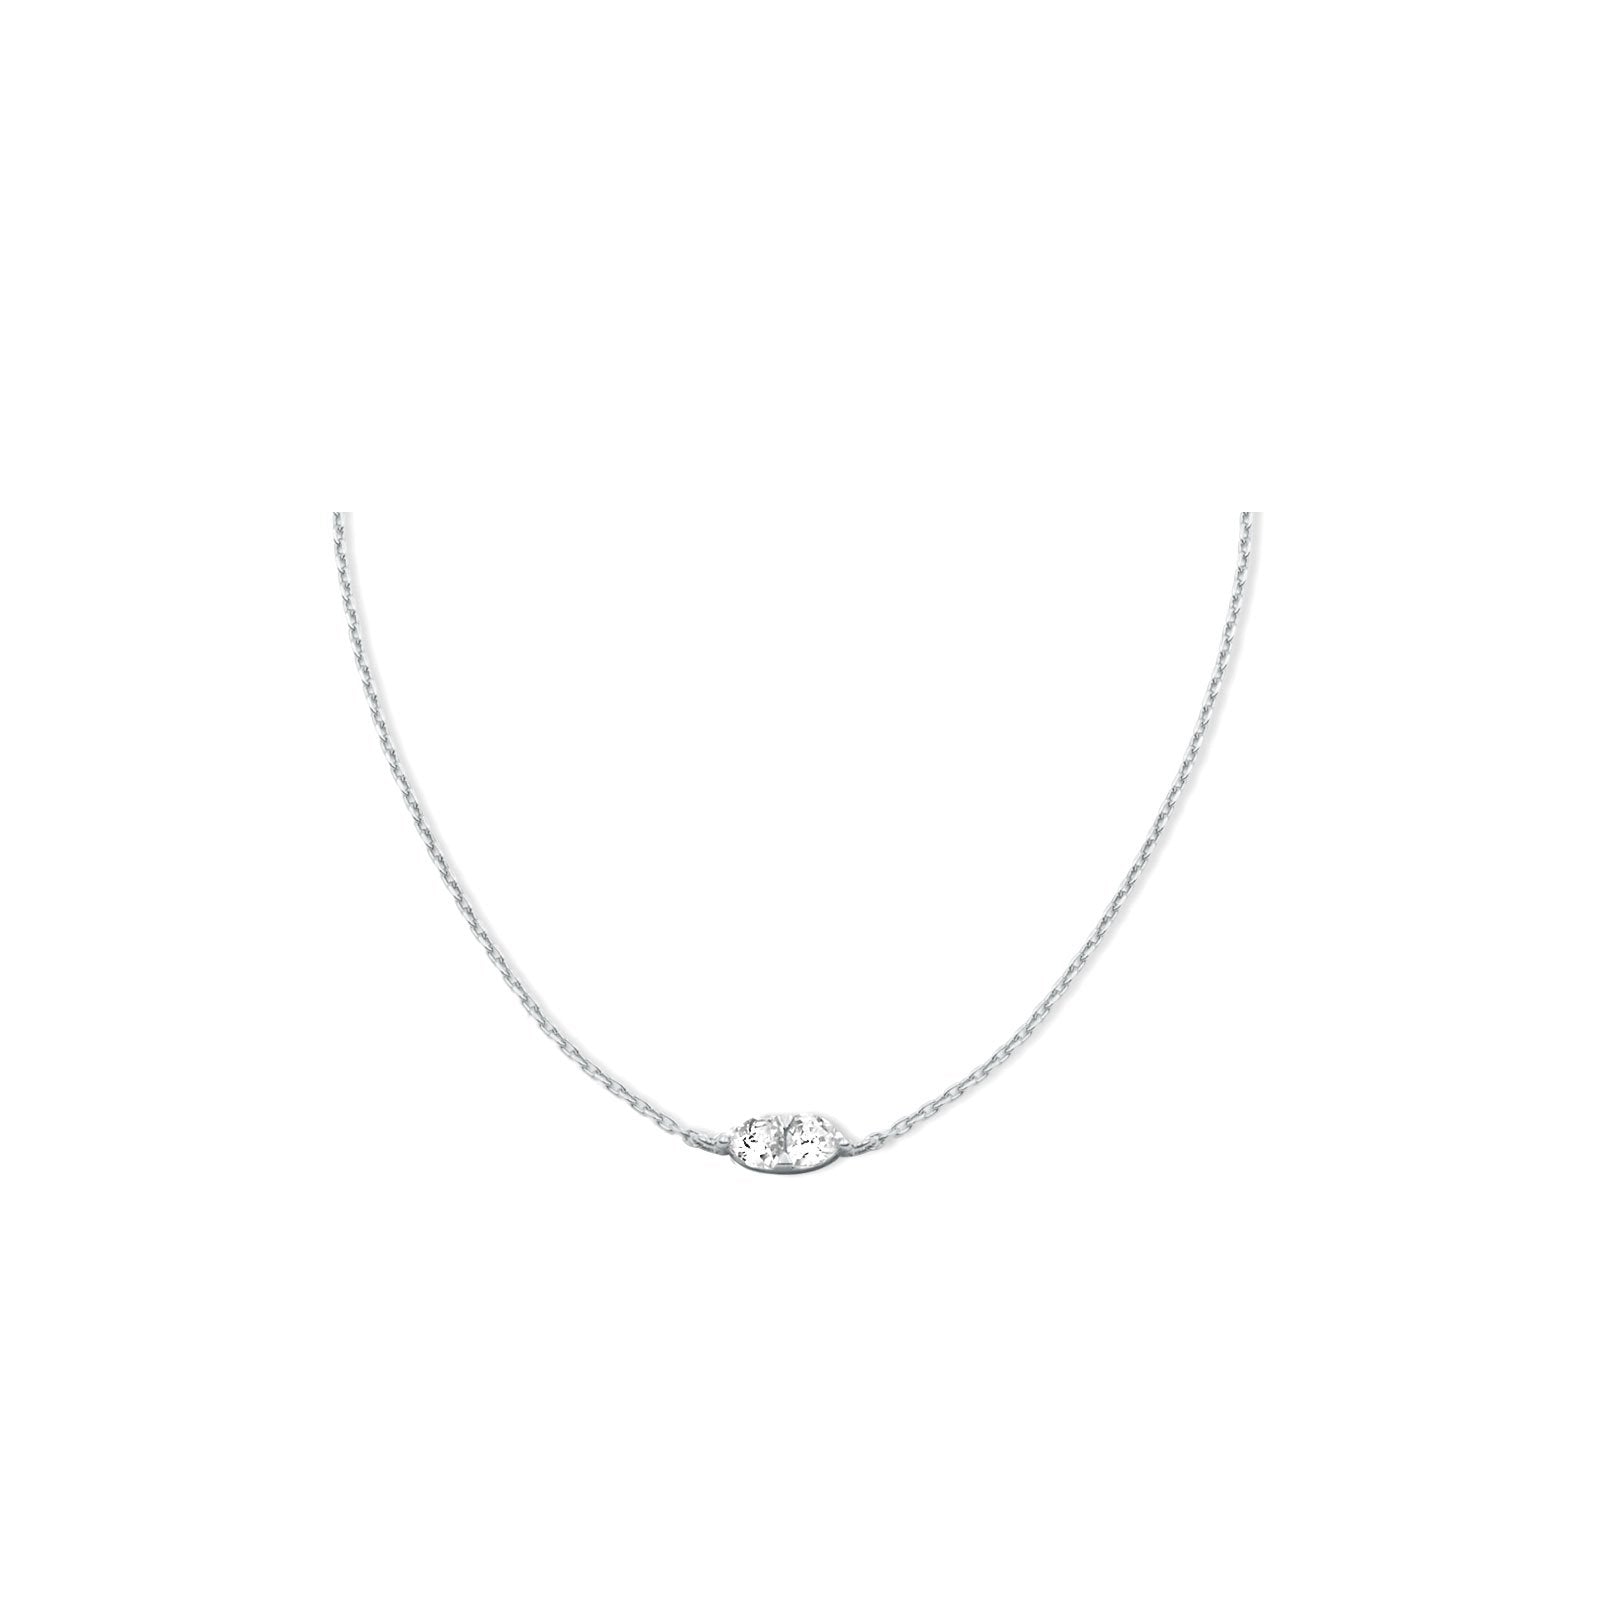 Theia - Vermeil & Sterling Silver Trillion Stone Pendant - Camille Jewelry